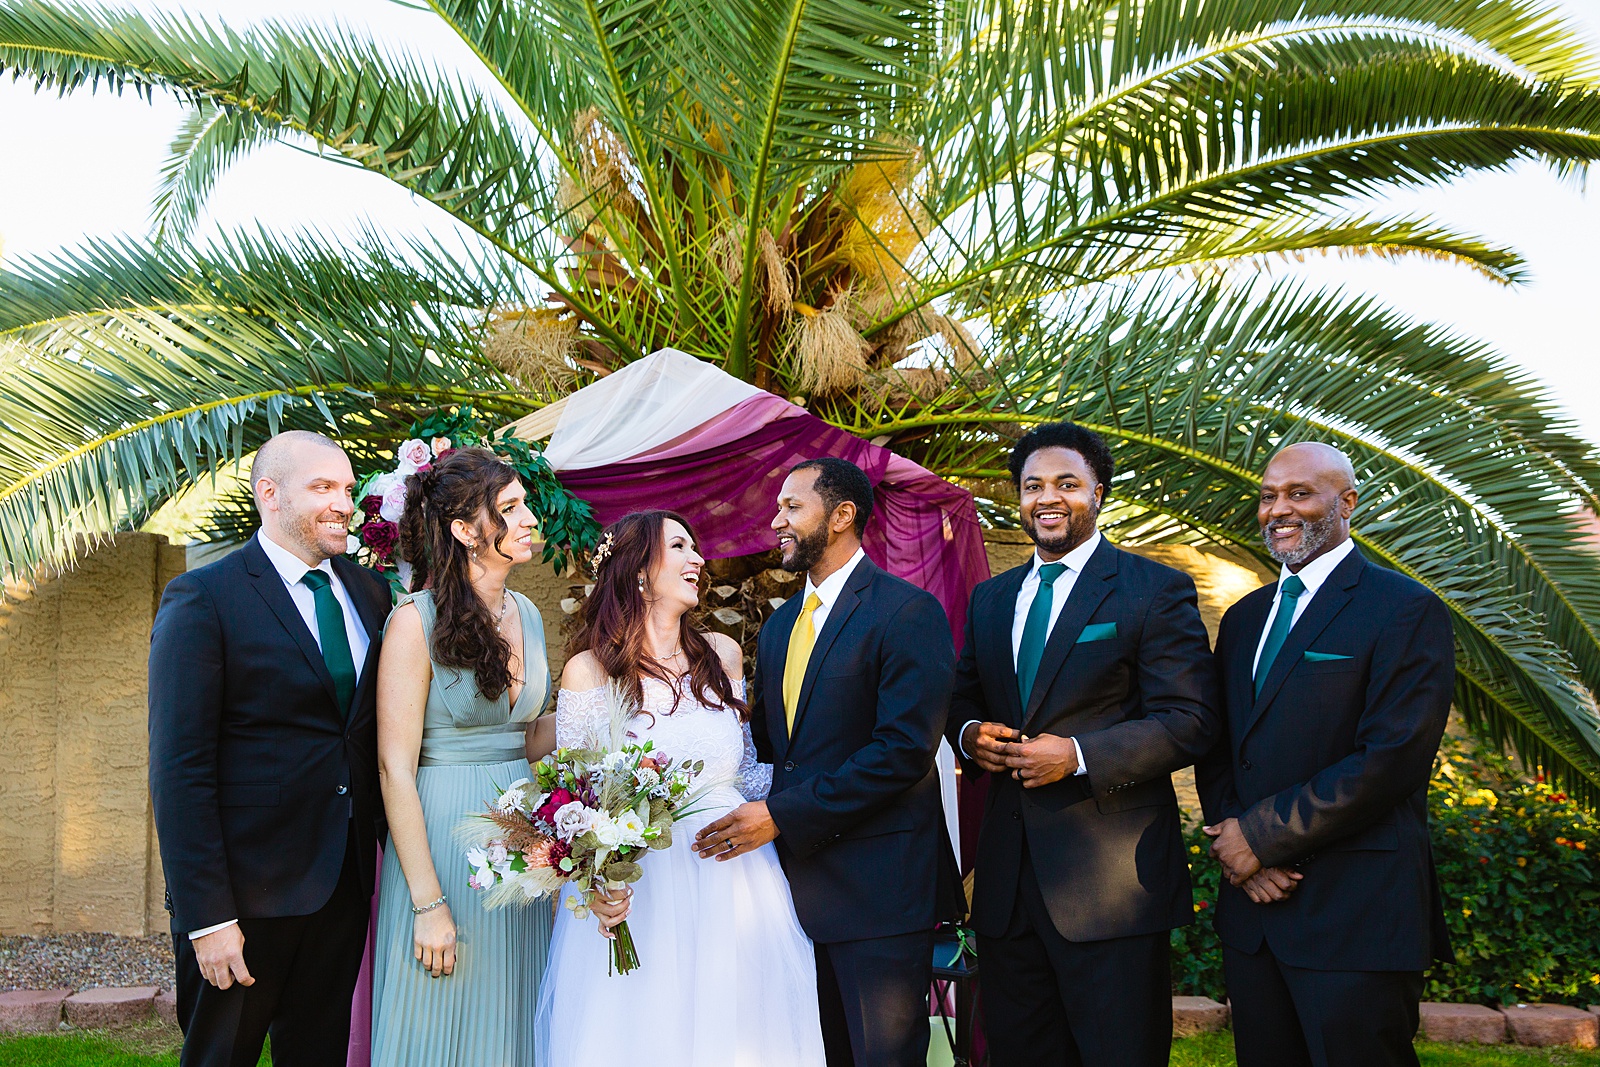 Mixed gender bridal party laughing together at Backyard Micro wedding by Scottsdale wedding photographer PMA Photography.